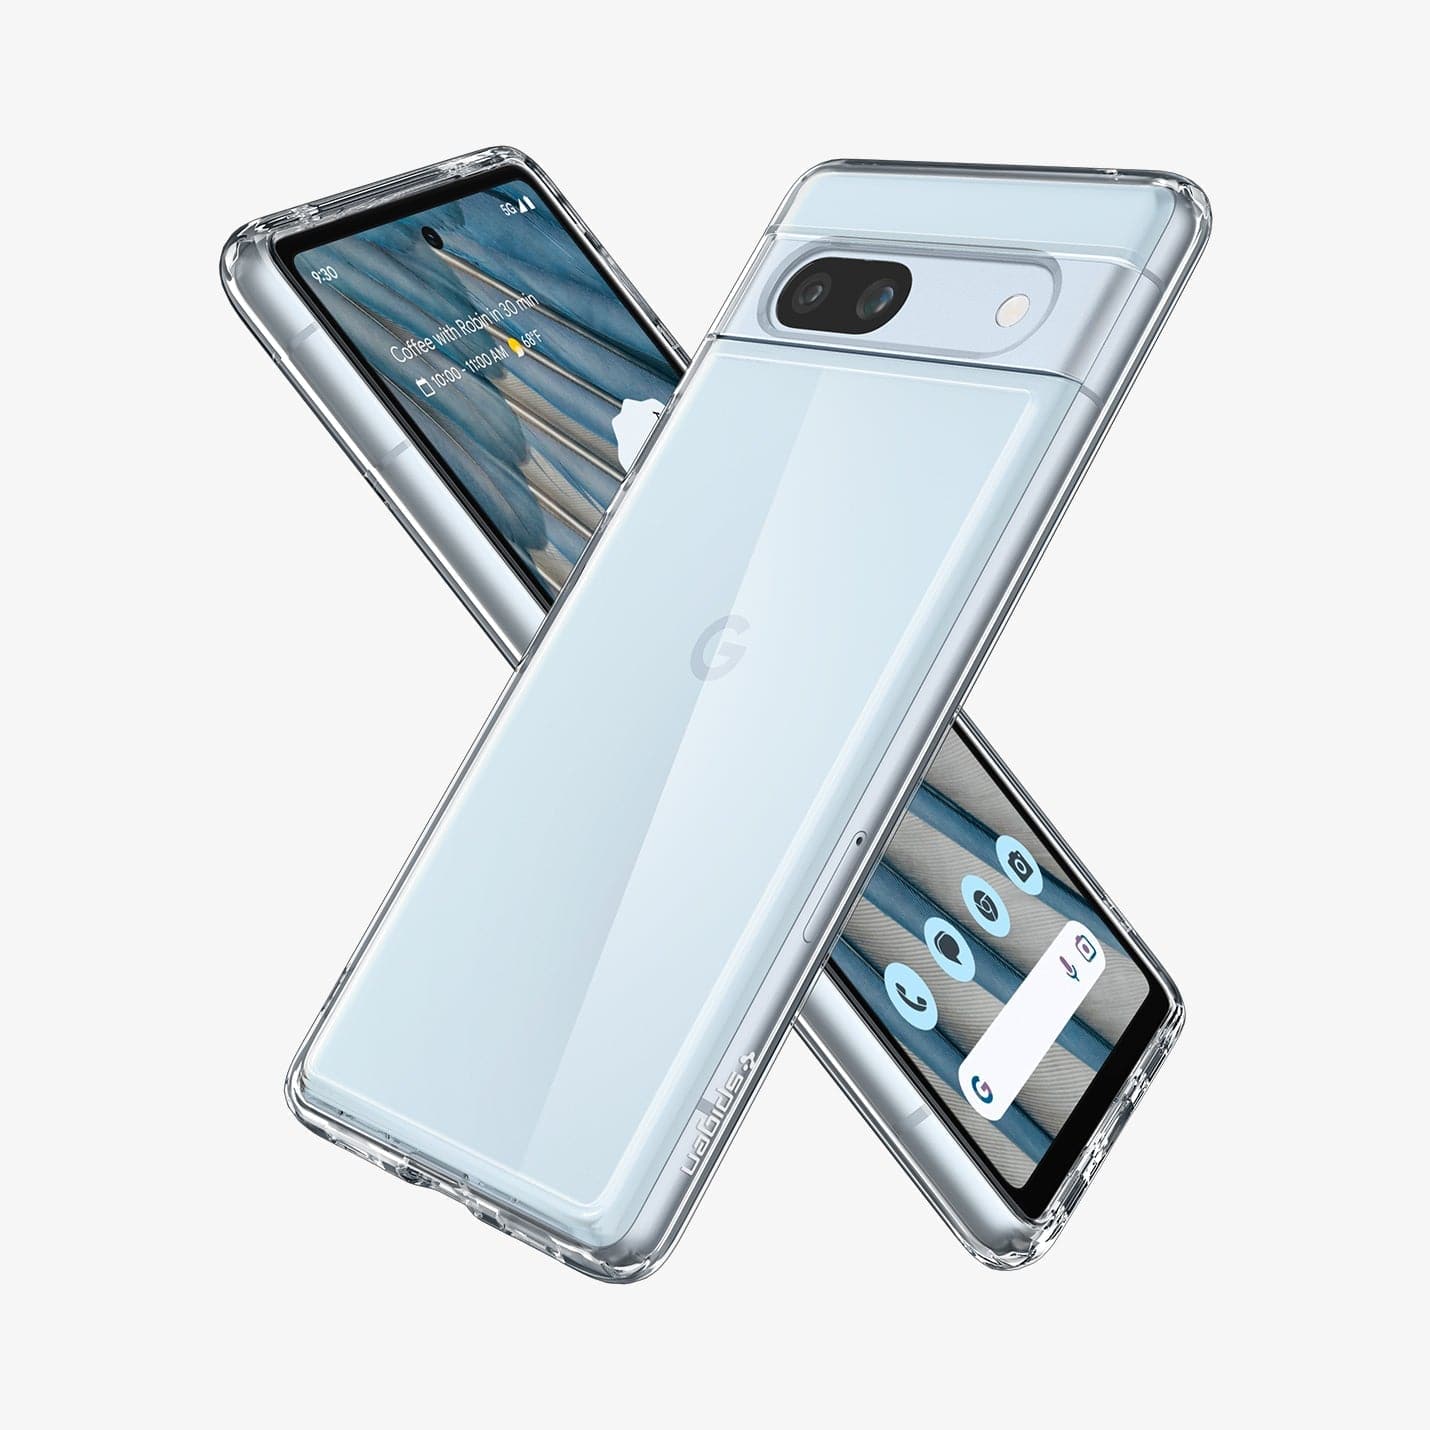 ACS05817 - Pixel 7a Case Ultra Hybrid in crystal clear showing the back, front and sides